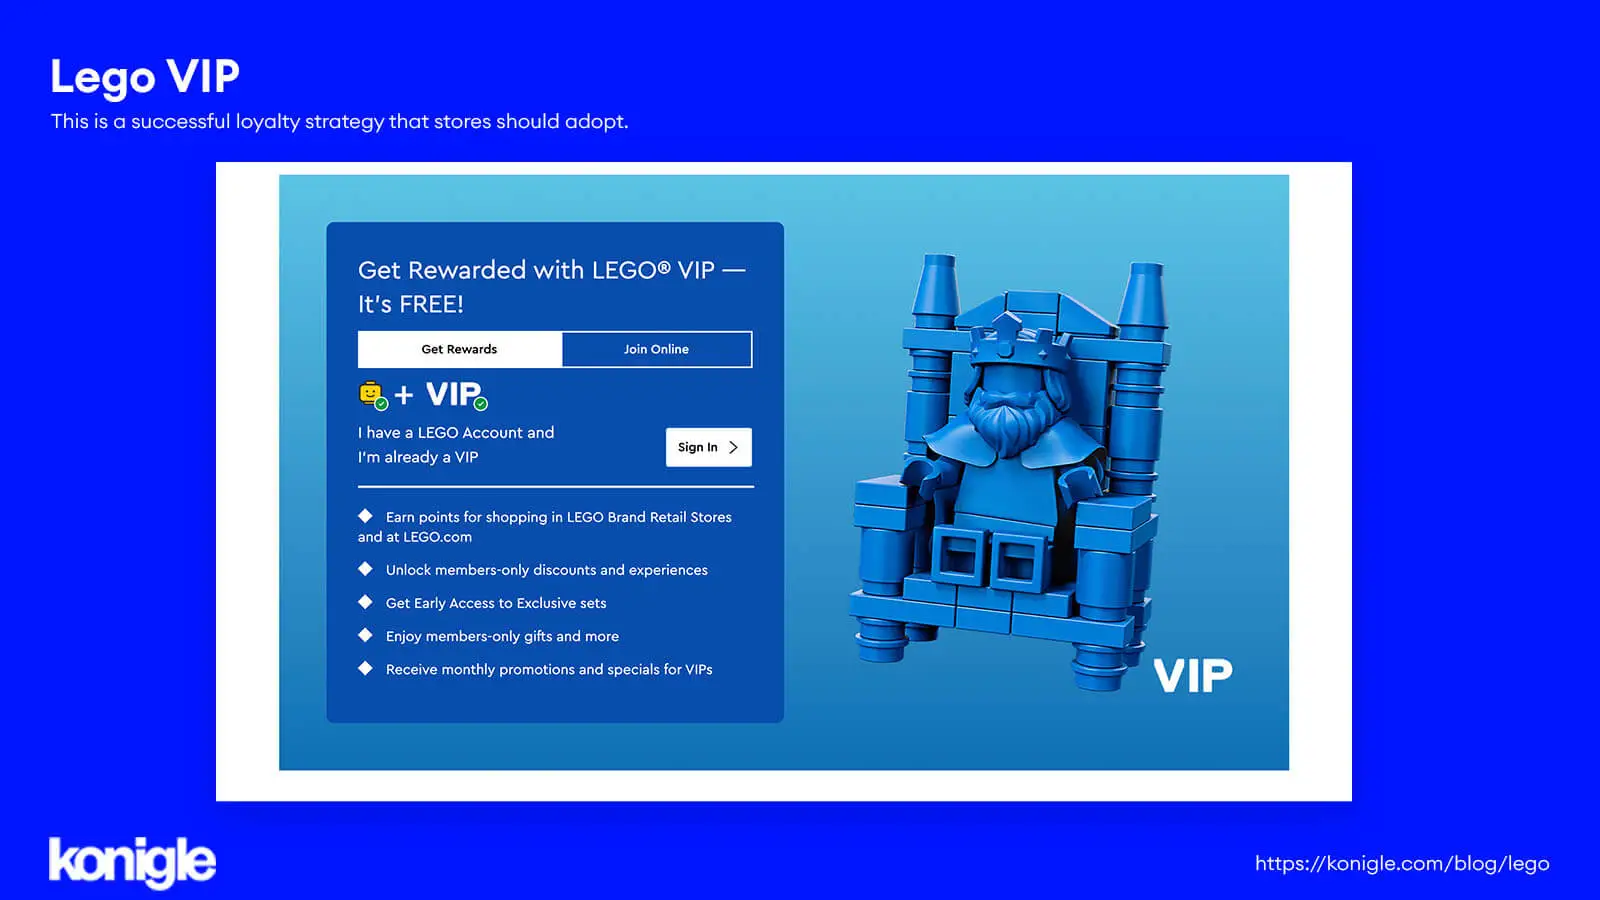 LEGO VIPs can collect 6.5 points for every $1 spent, then redeem discount vouchers with the points earned